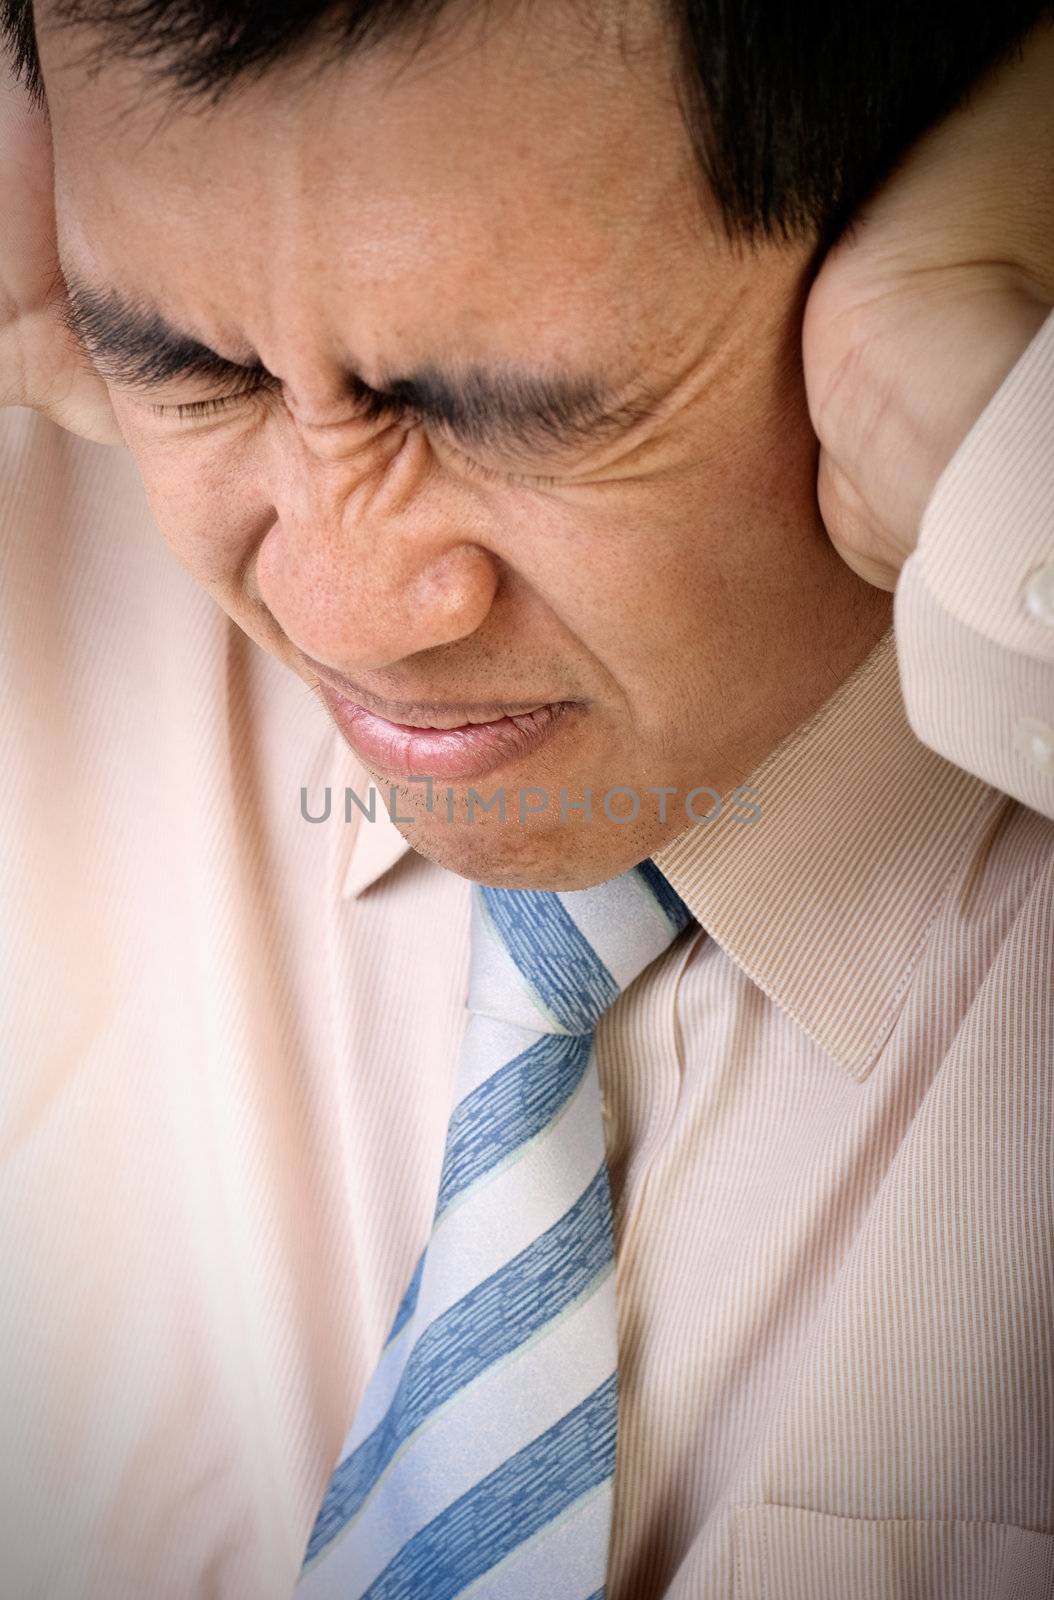 Stress of businessman with pain expression holding head by hands.